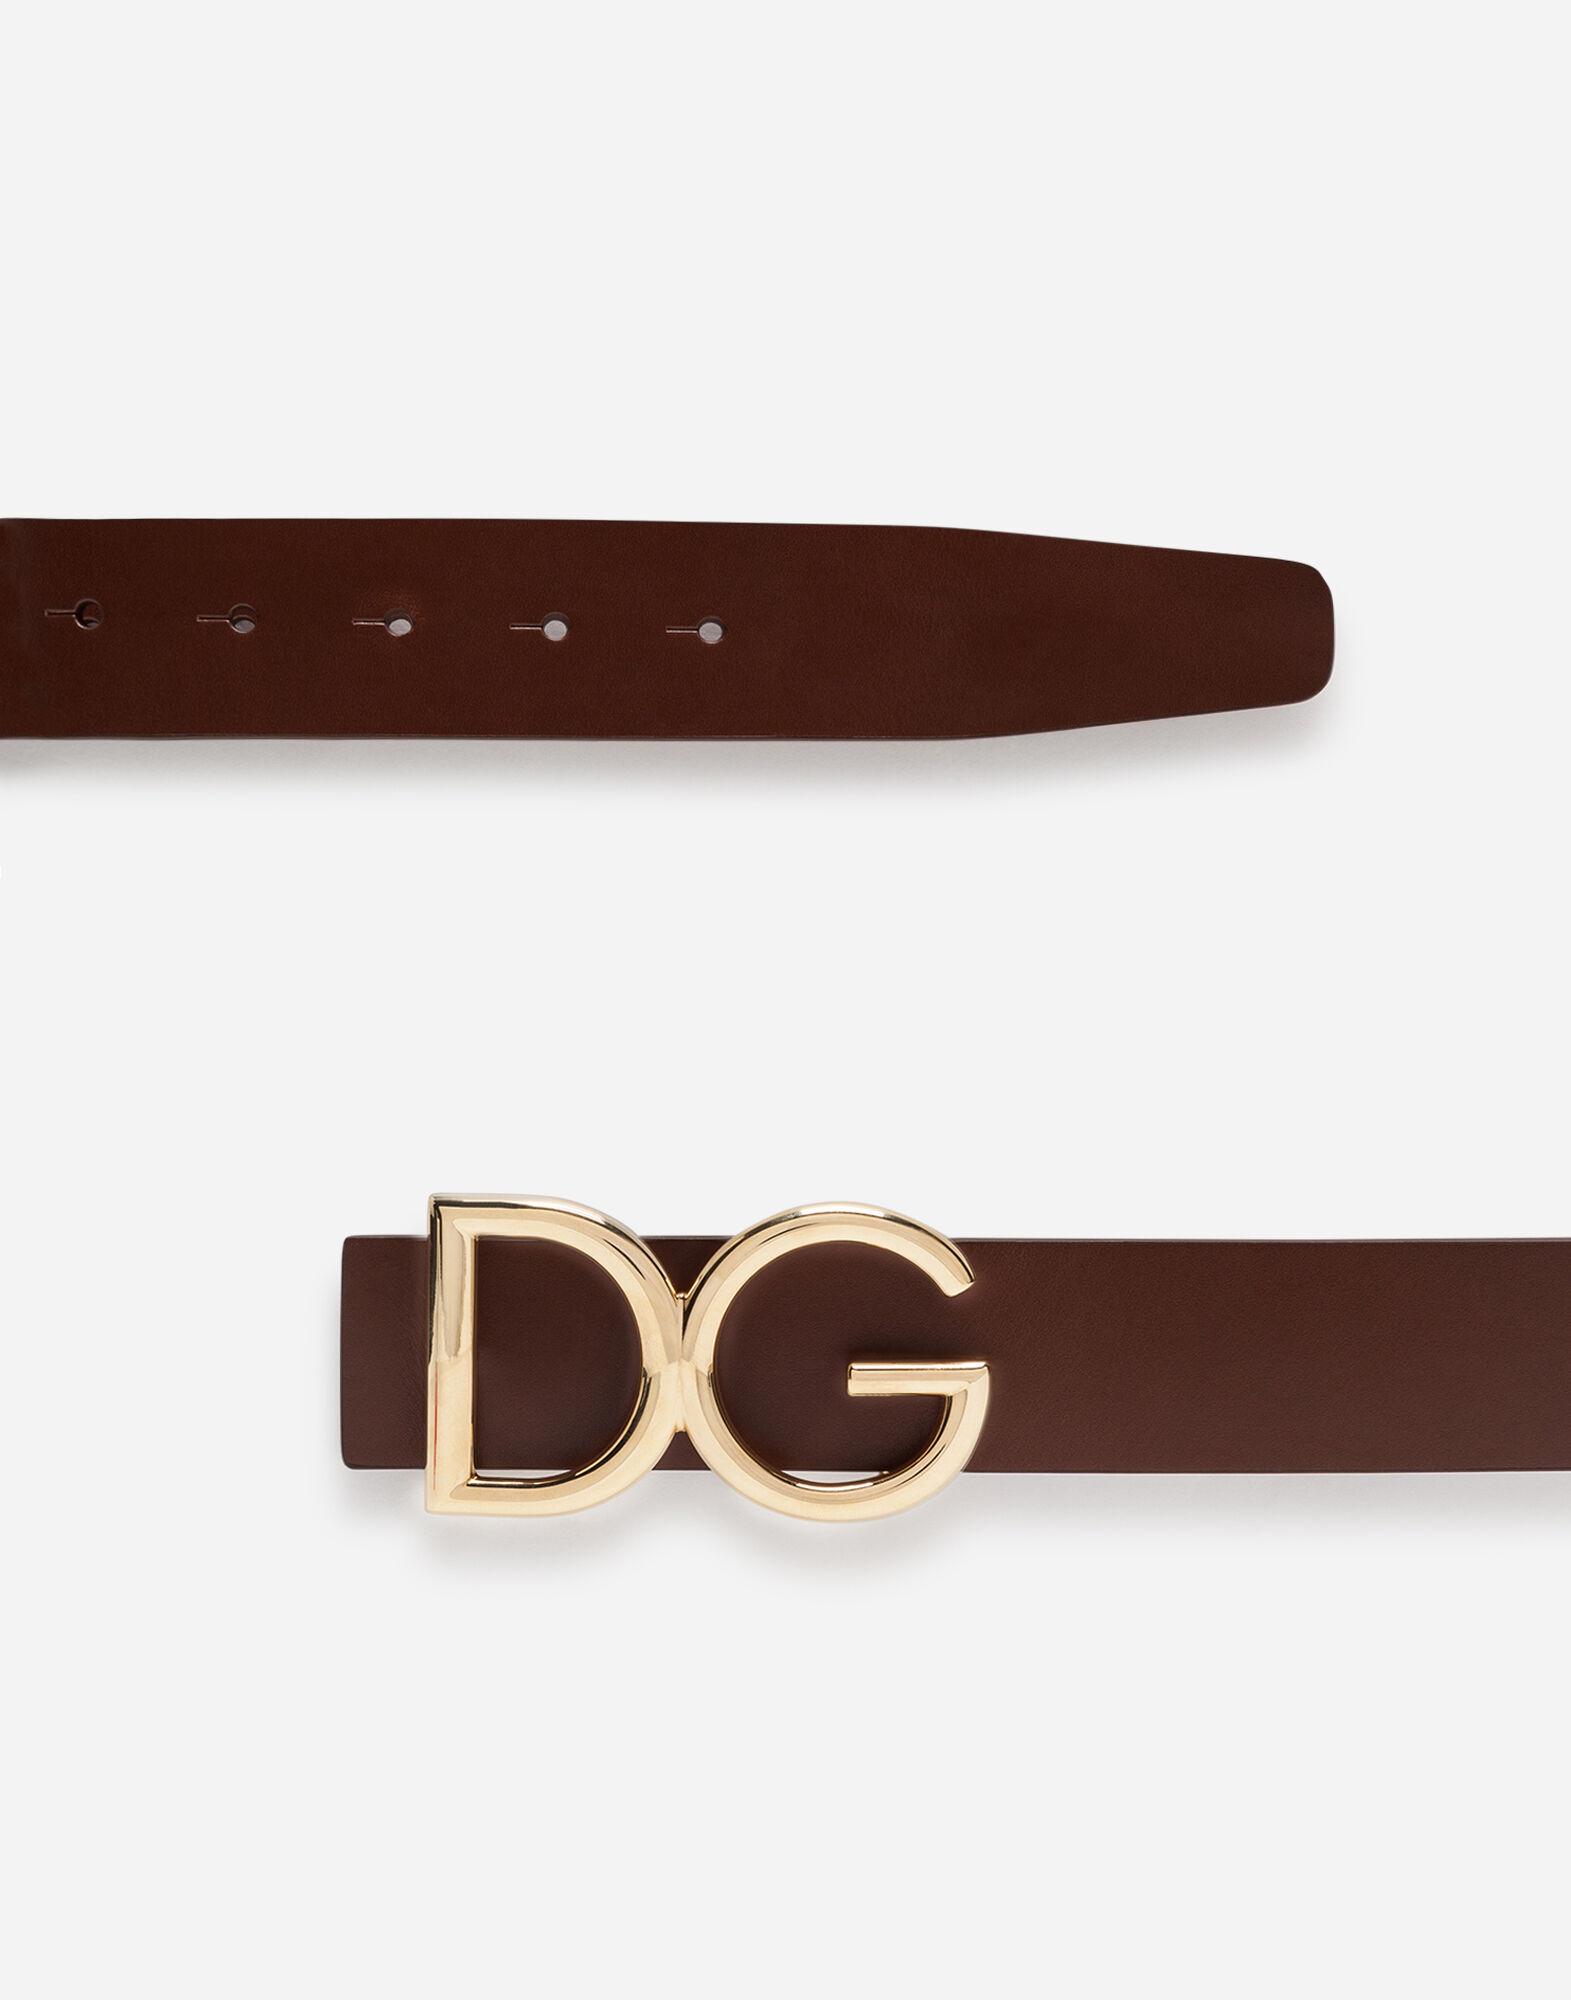 Dolce & Gabbana Leather Belt With Dg Logo in Brown for Men - Lyst